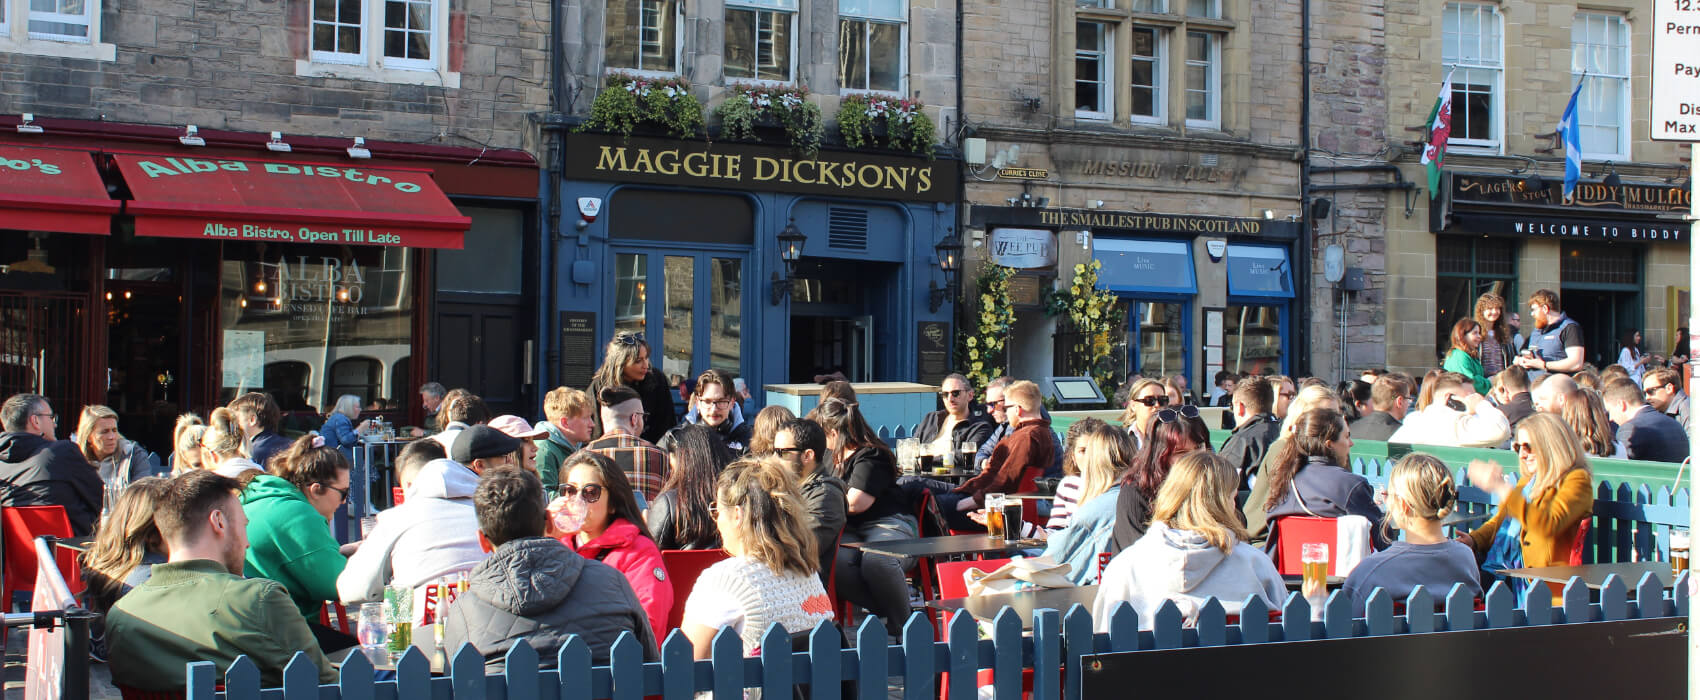 Exterior of Maggie Dicksons pub with people sitting in outside seating